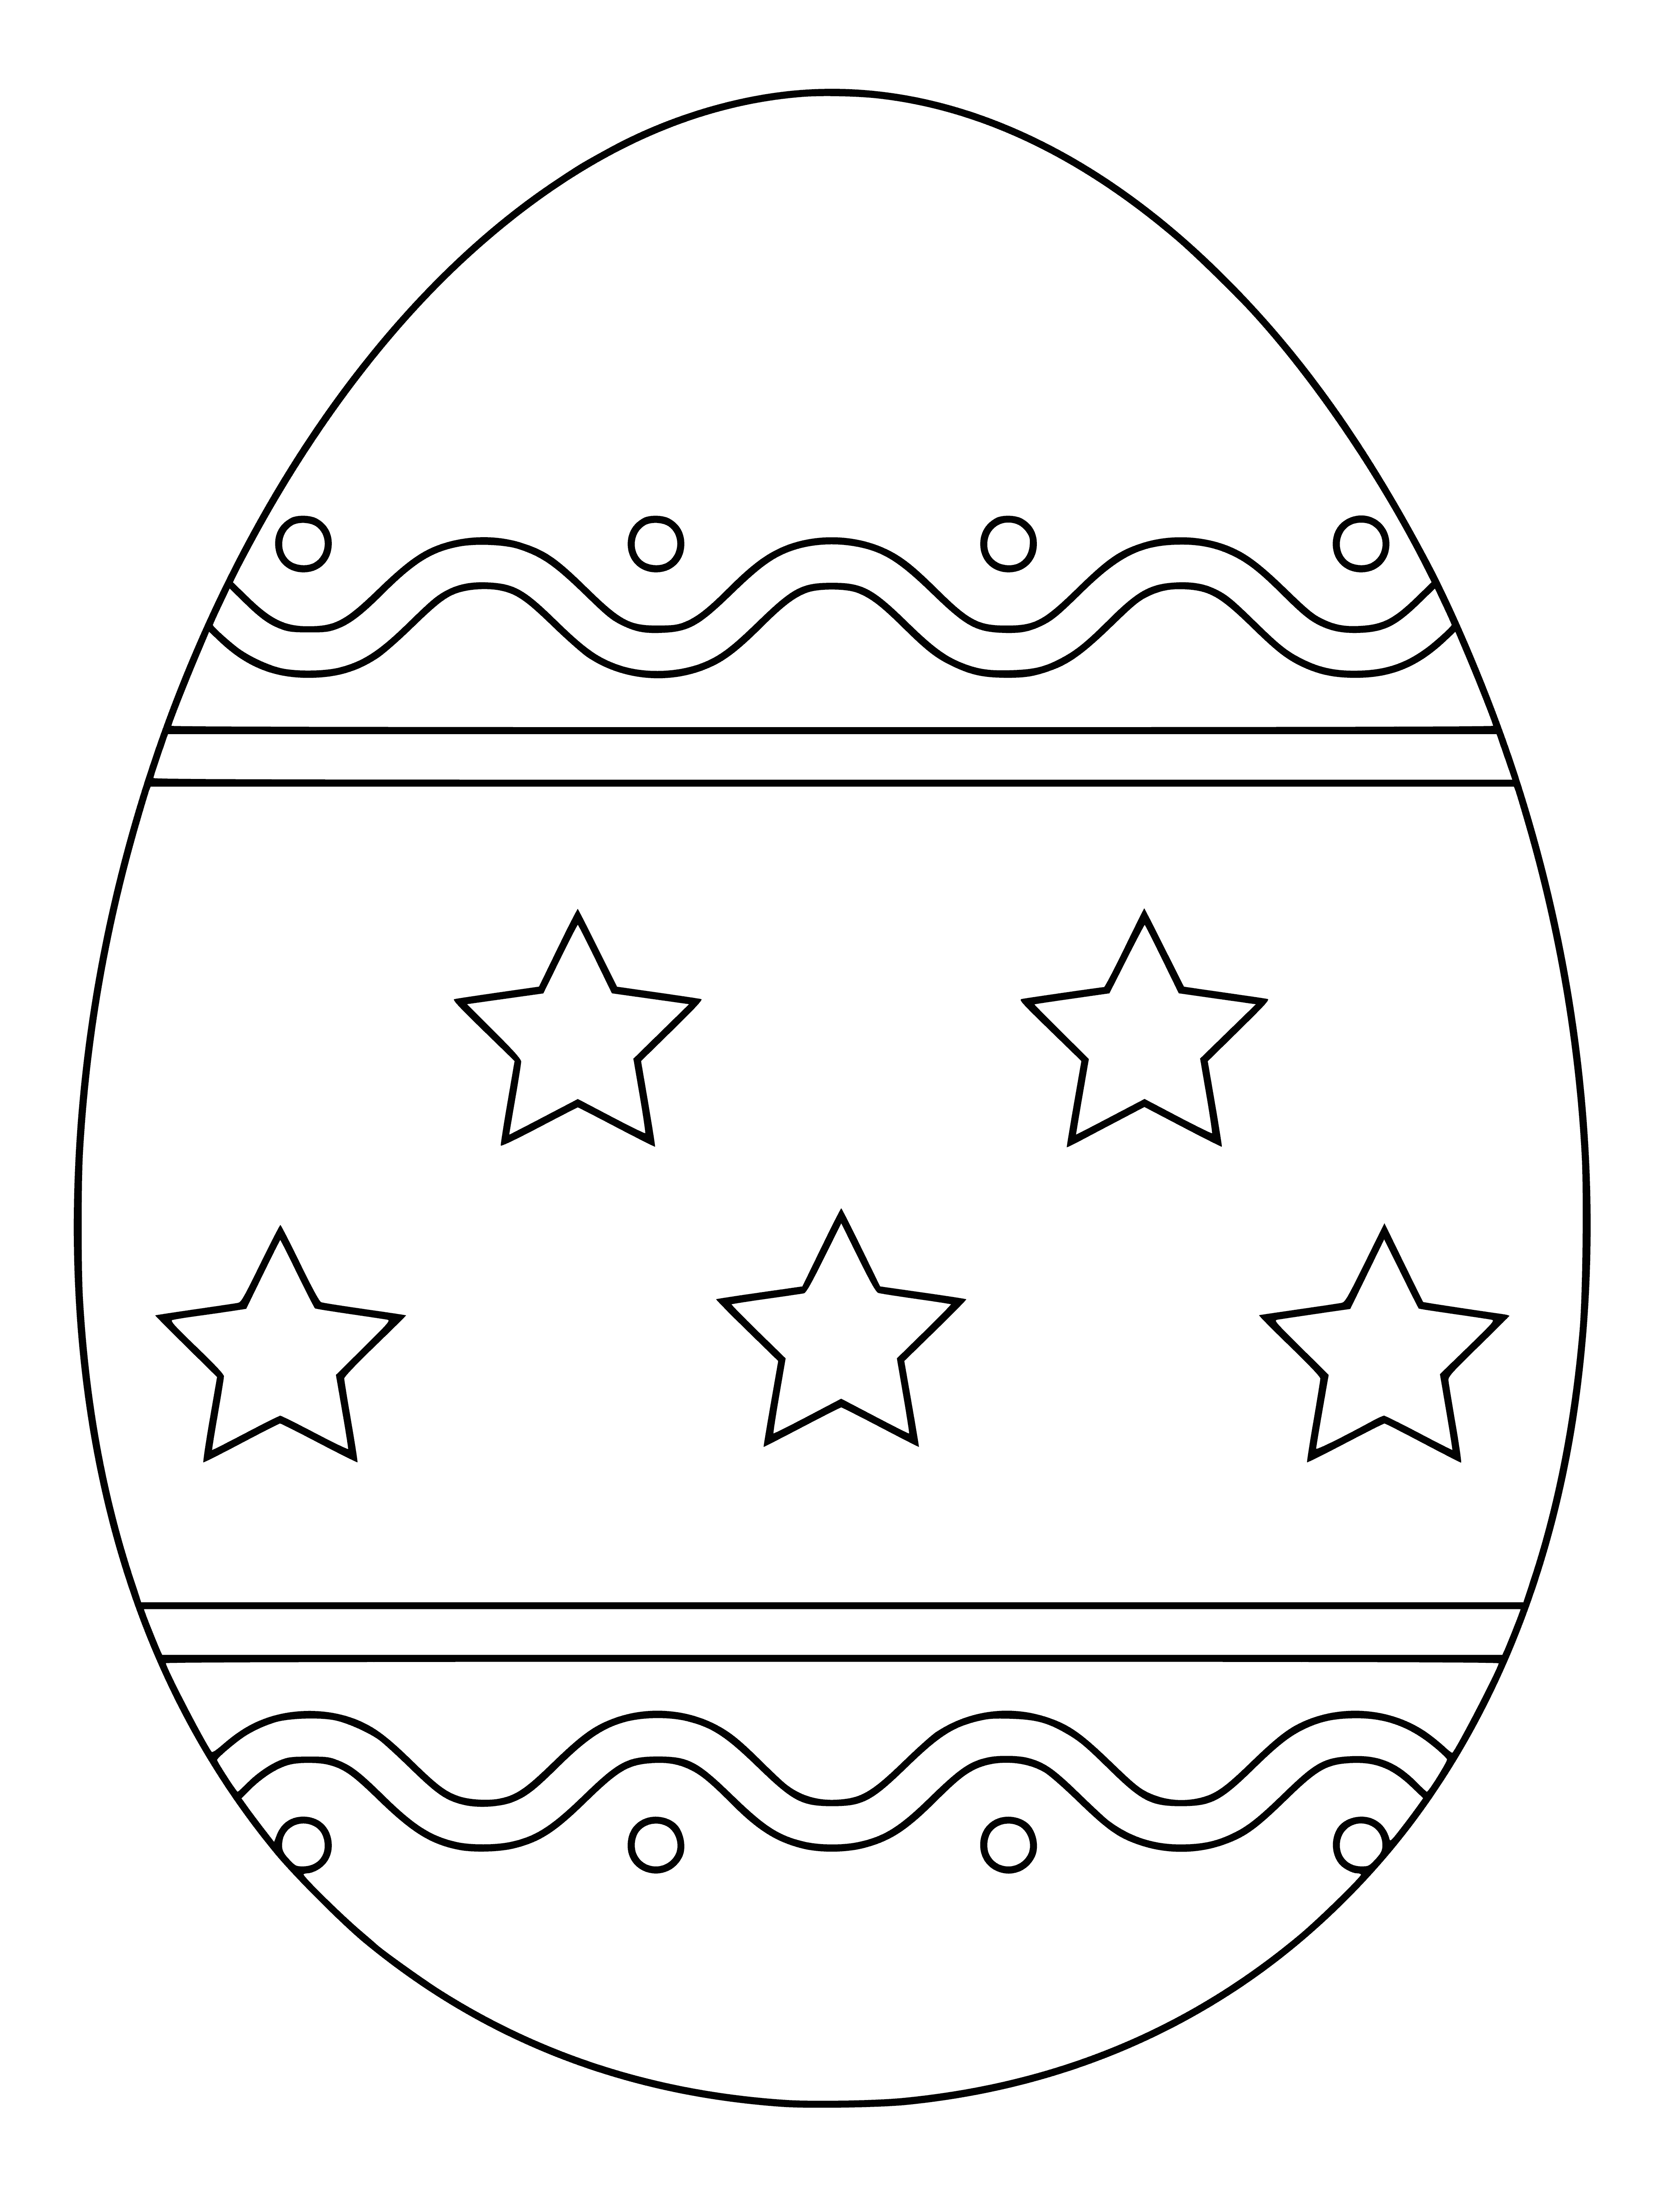 coloring page: Six Easter eggs: stripes, spots, brown, tan, white. One of each has a unique combination of colors! #EasterEggs